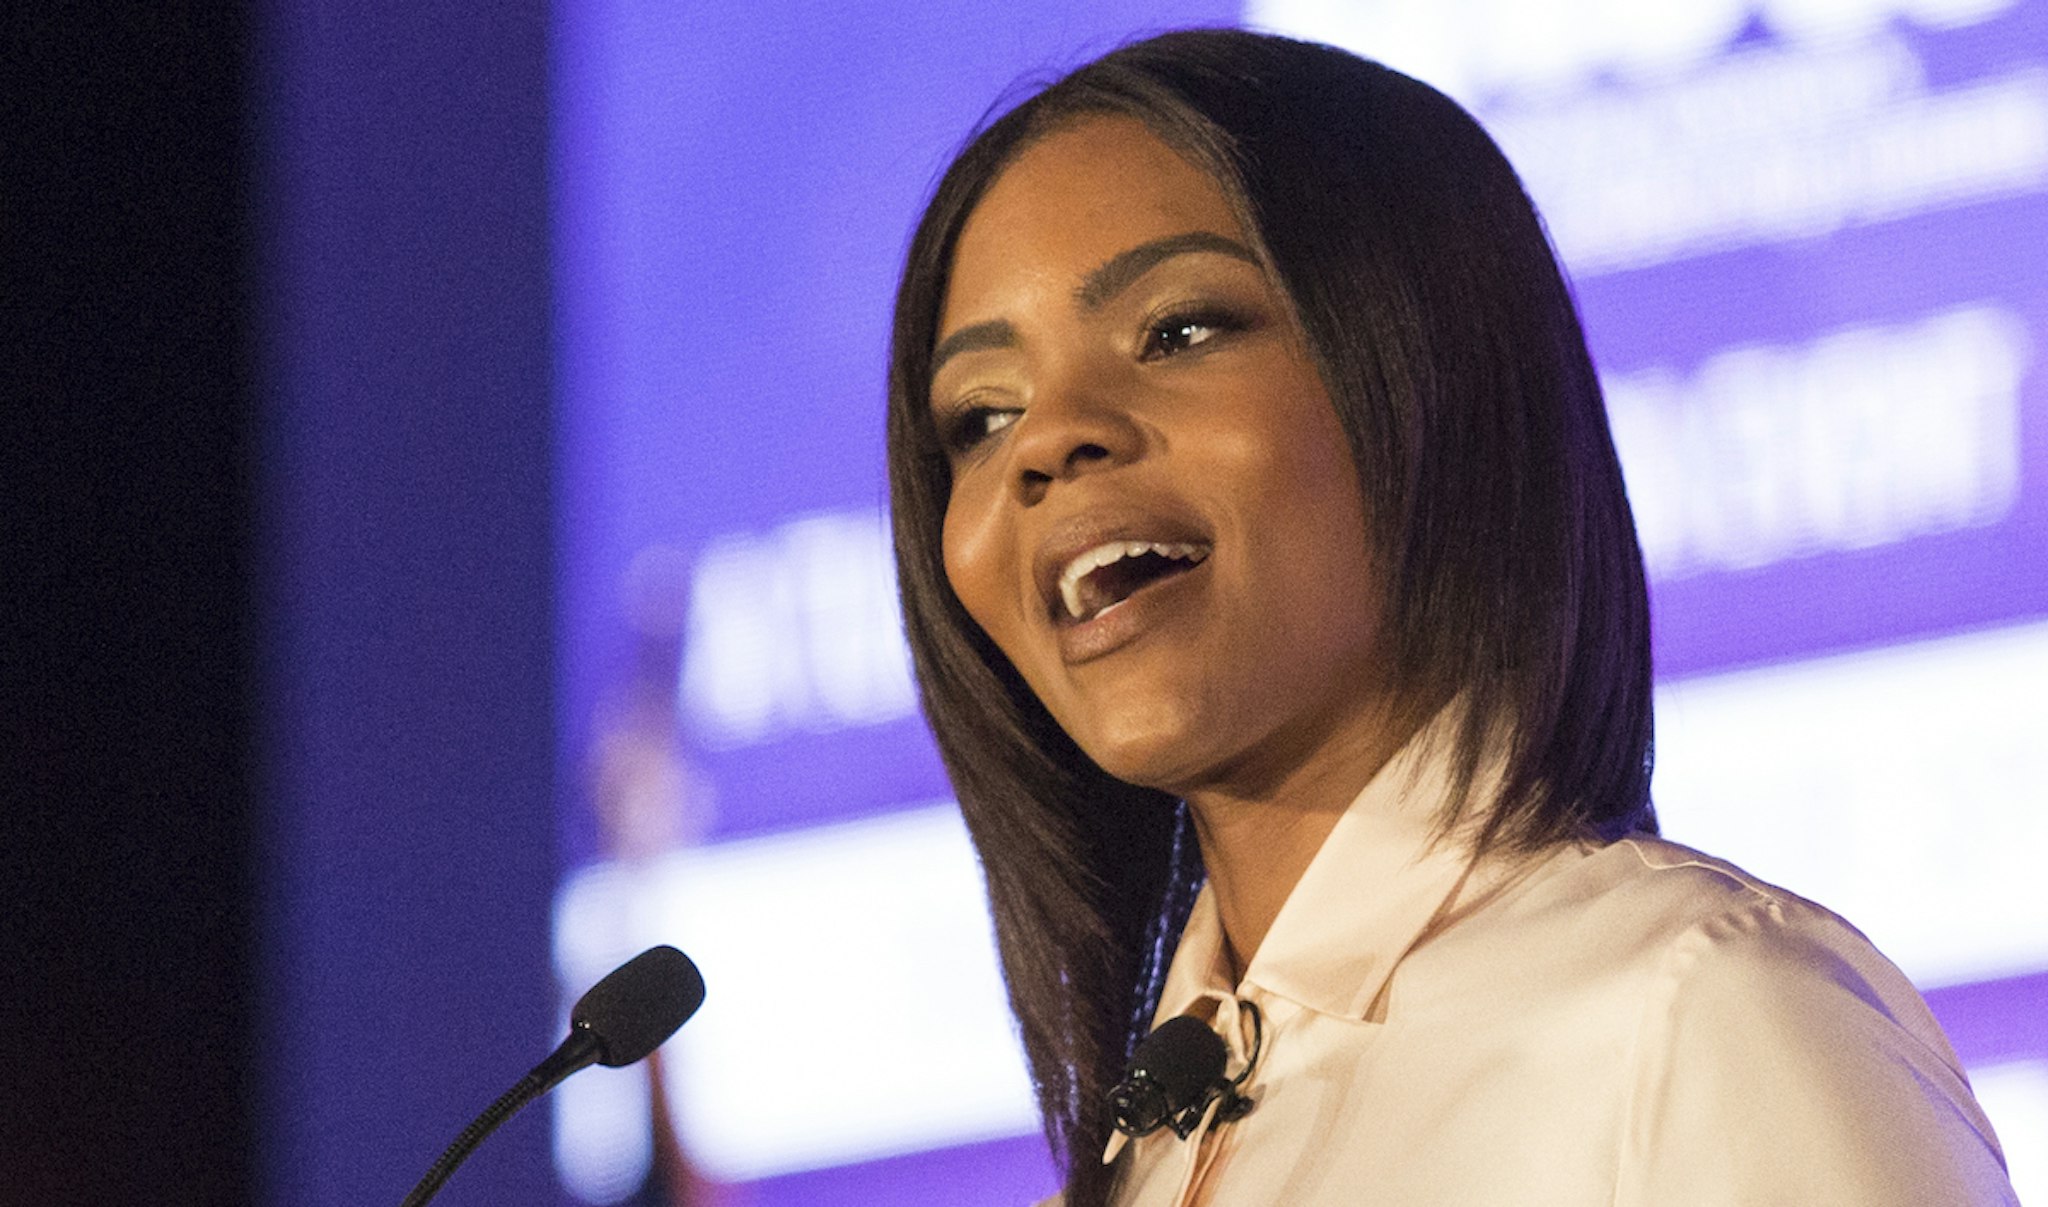 Conservative commentator, Candace Owens, speaks at the Turning Point USA Young Women’s Leadership Summit in Dallas, Texas, on June 16, 2018.